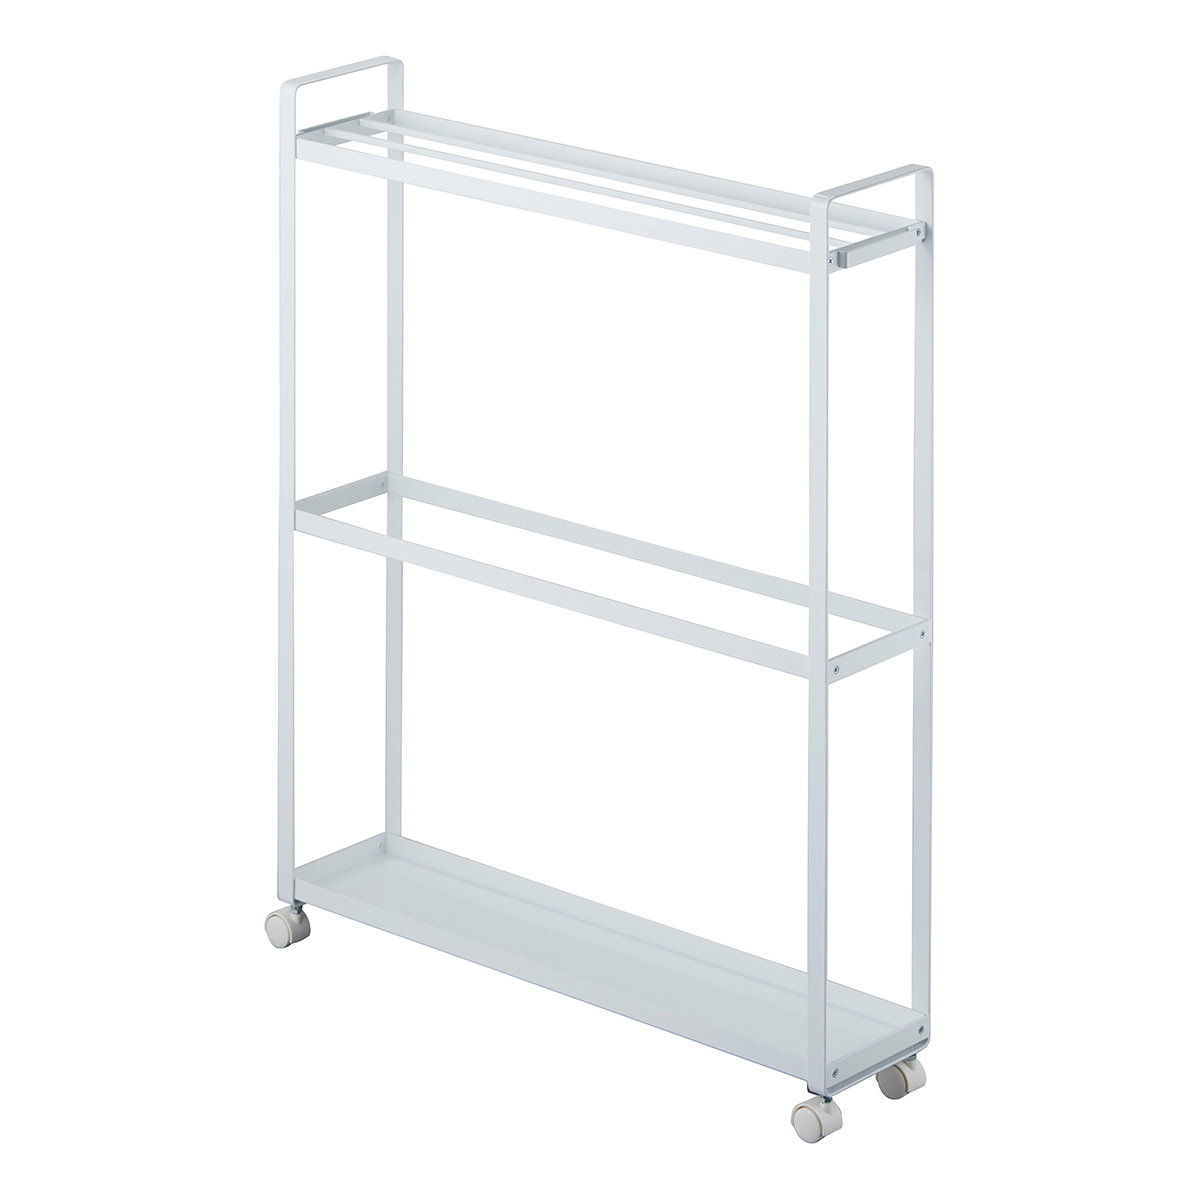 https://www.containerstore.com/catalogimages/485278/10094696-ven.jpg